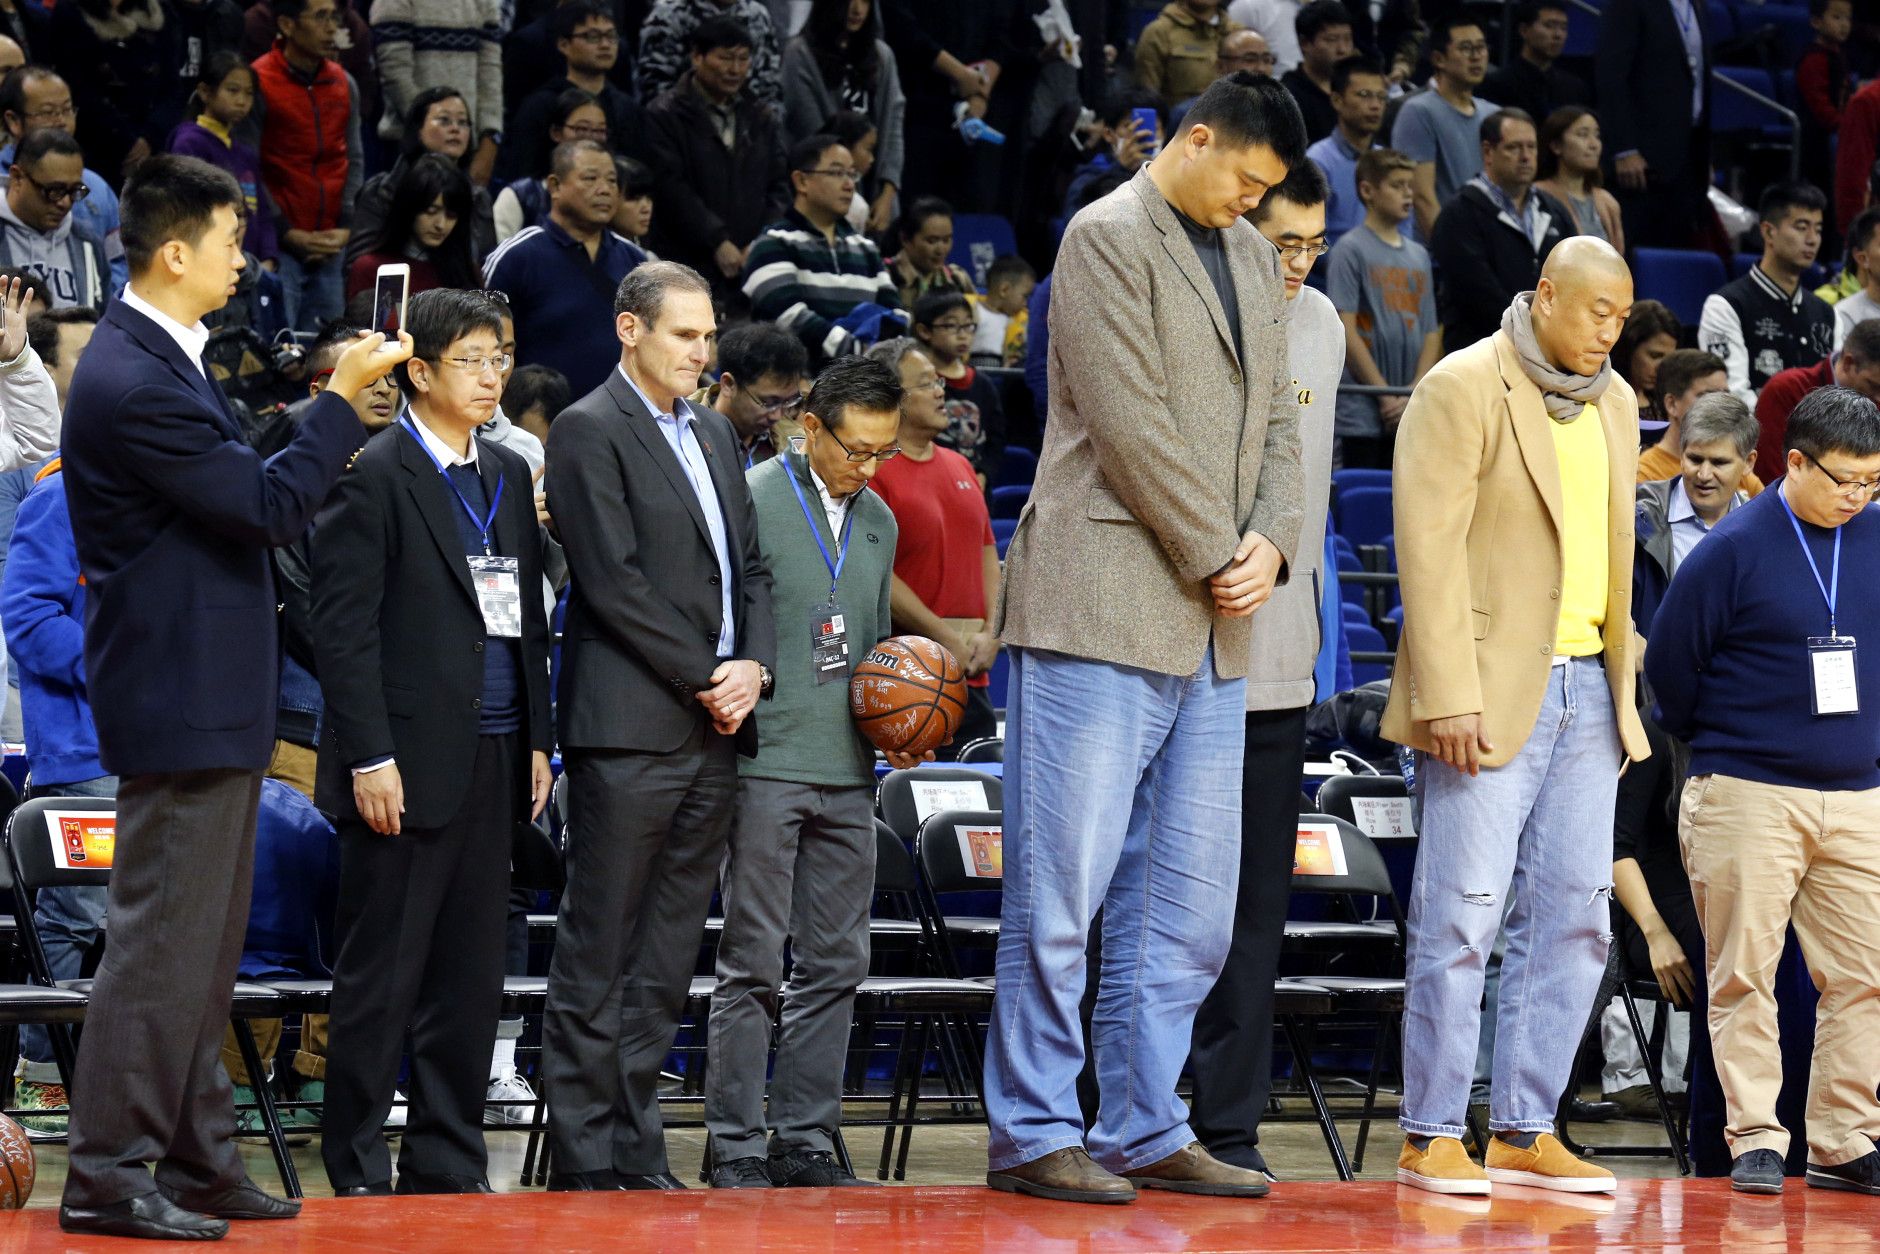 Former NBA star Yao Ming, third from right bows as he observes a moment of silence with other attendees to mark the terror attacks in Paris before a college basketball match between Washington Huskies and Texas Longhorns at the Mercedes Benz Arena in Shanghai, China, Saturday, Nov. 14, 2015. (AP Photo/Ng Han Guan)